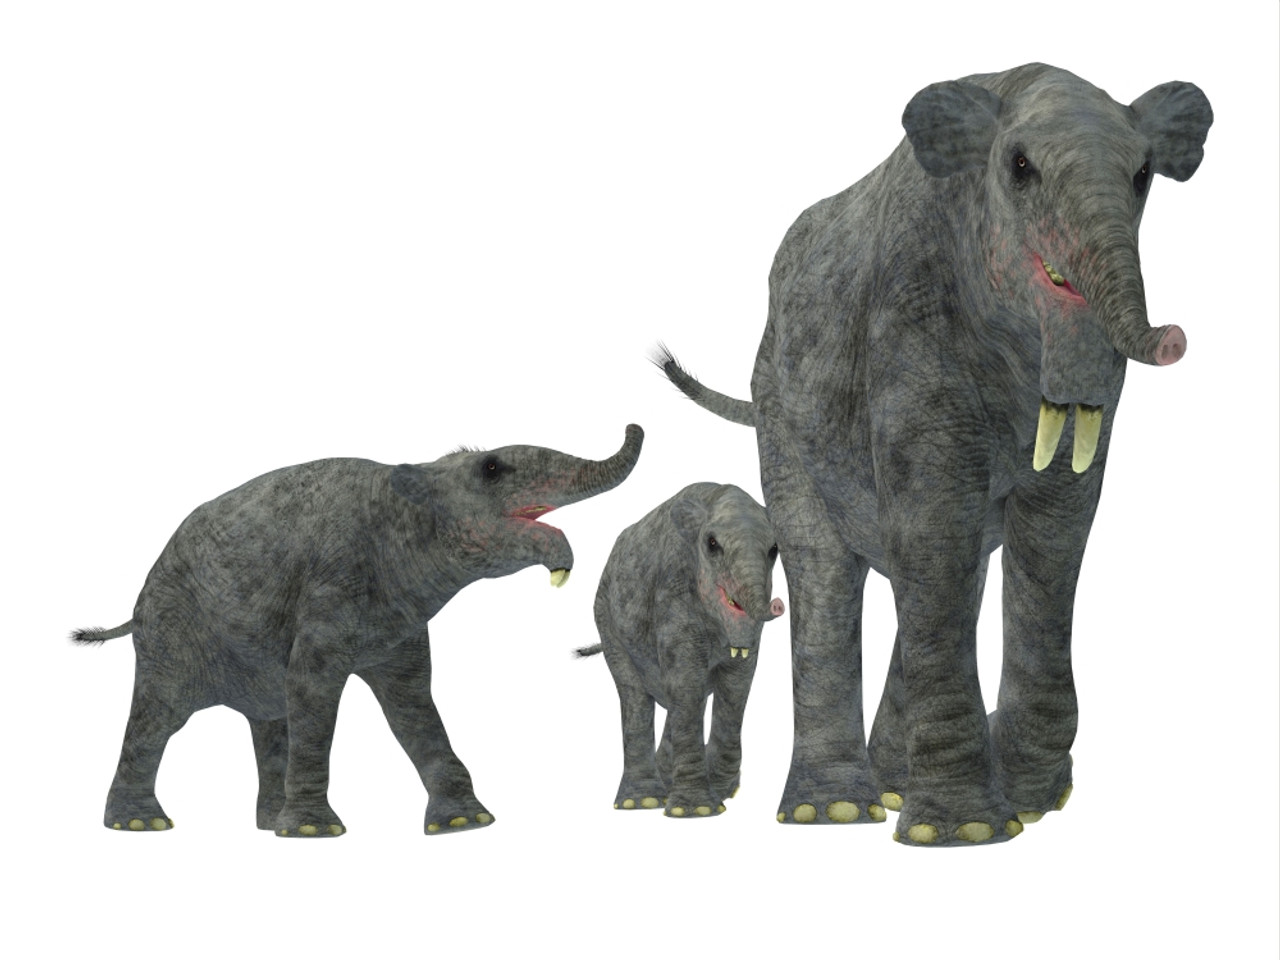 Deinotherium with offspring. Deinotherium was an enormous land mammal that  lived in Asia, Africa and Europe during the Miocene to Pleistocene Periods  Poster Print - Item # VARPSTCFR200653P - Posterazzi